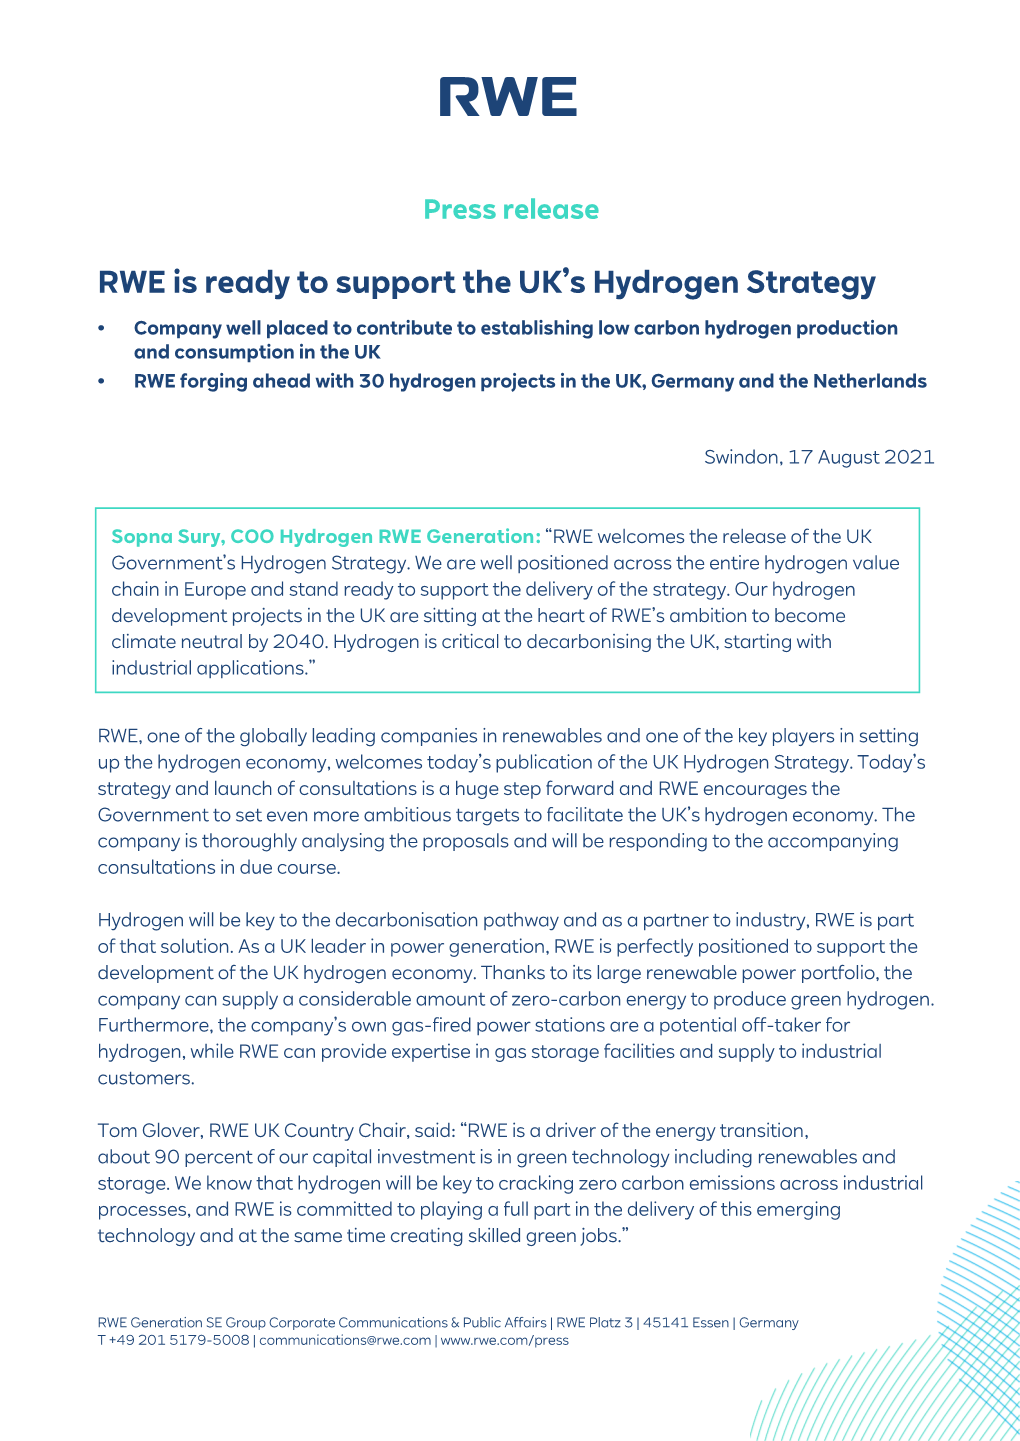 RWE Is Ready to Support the UK's Hydrogen Strategy